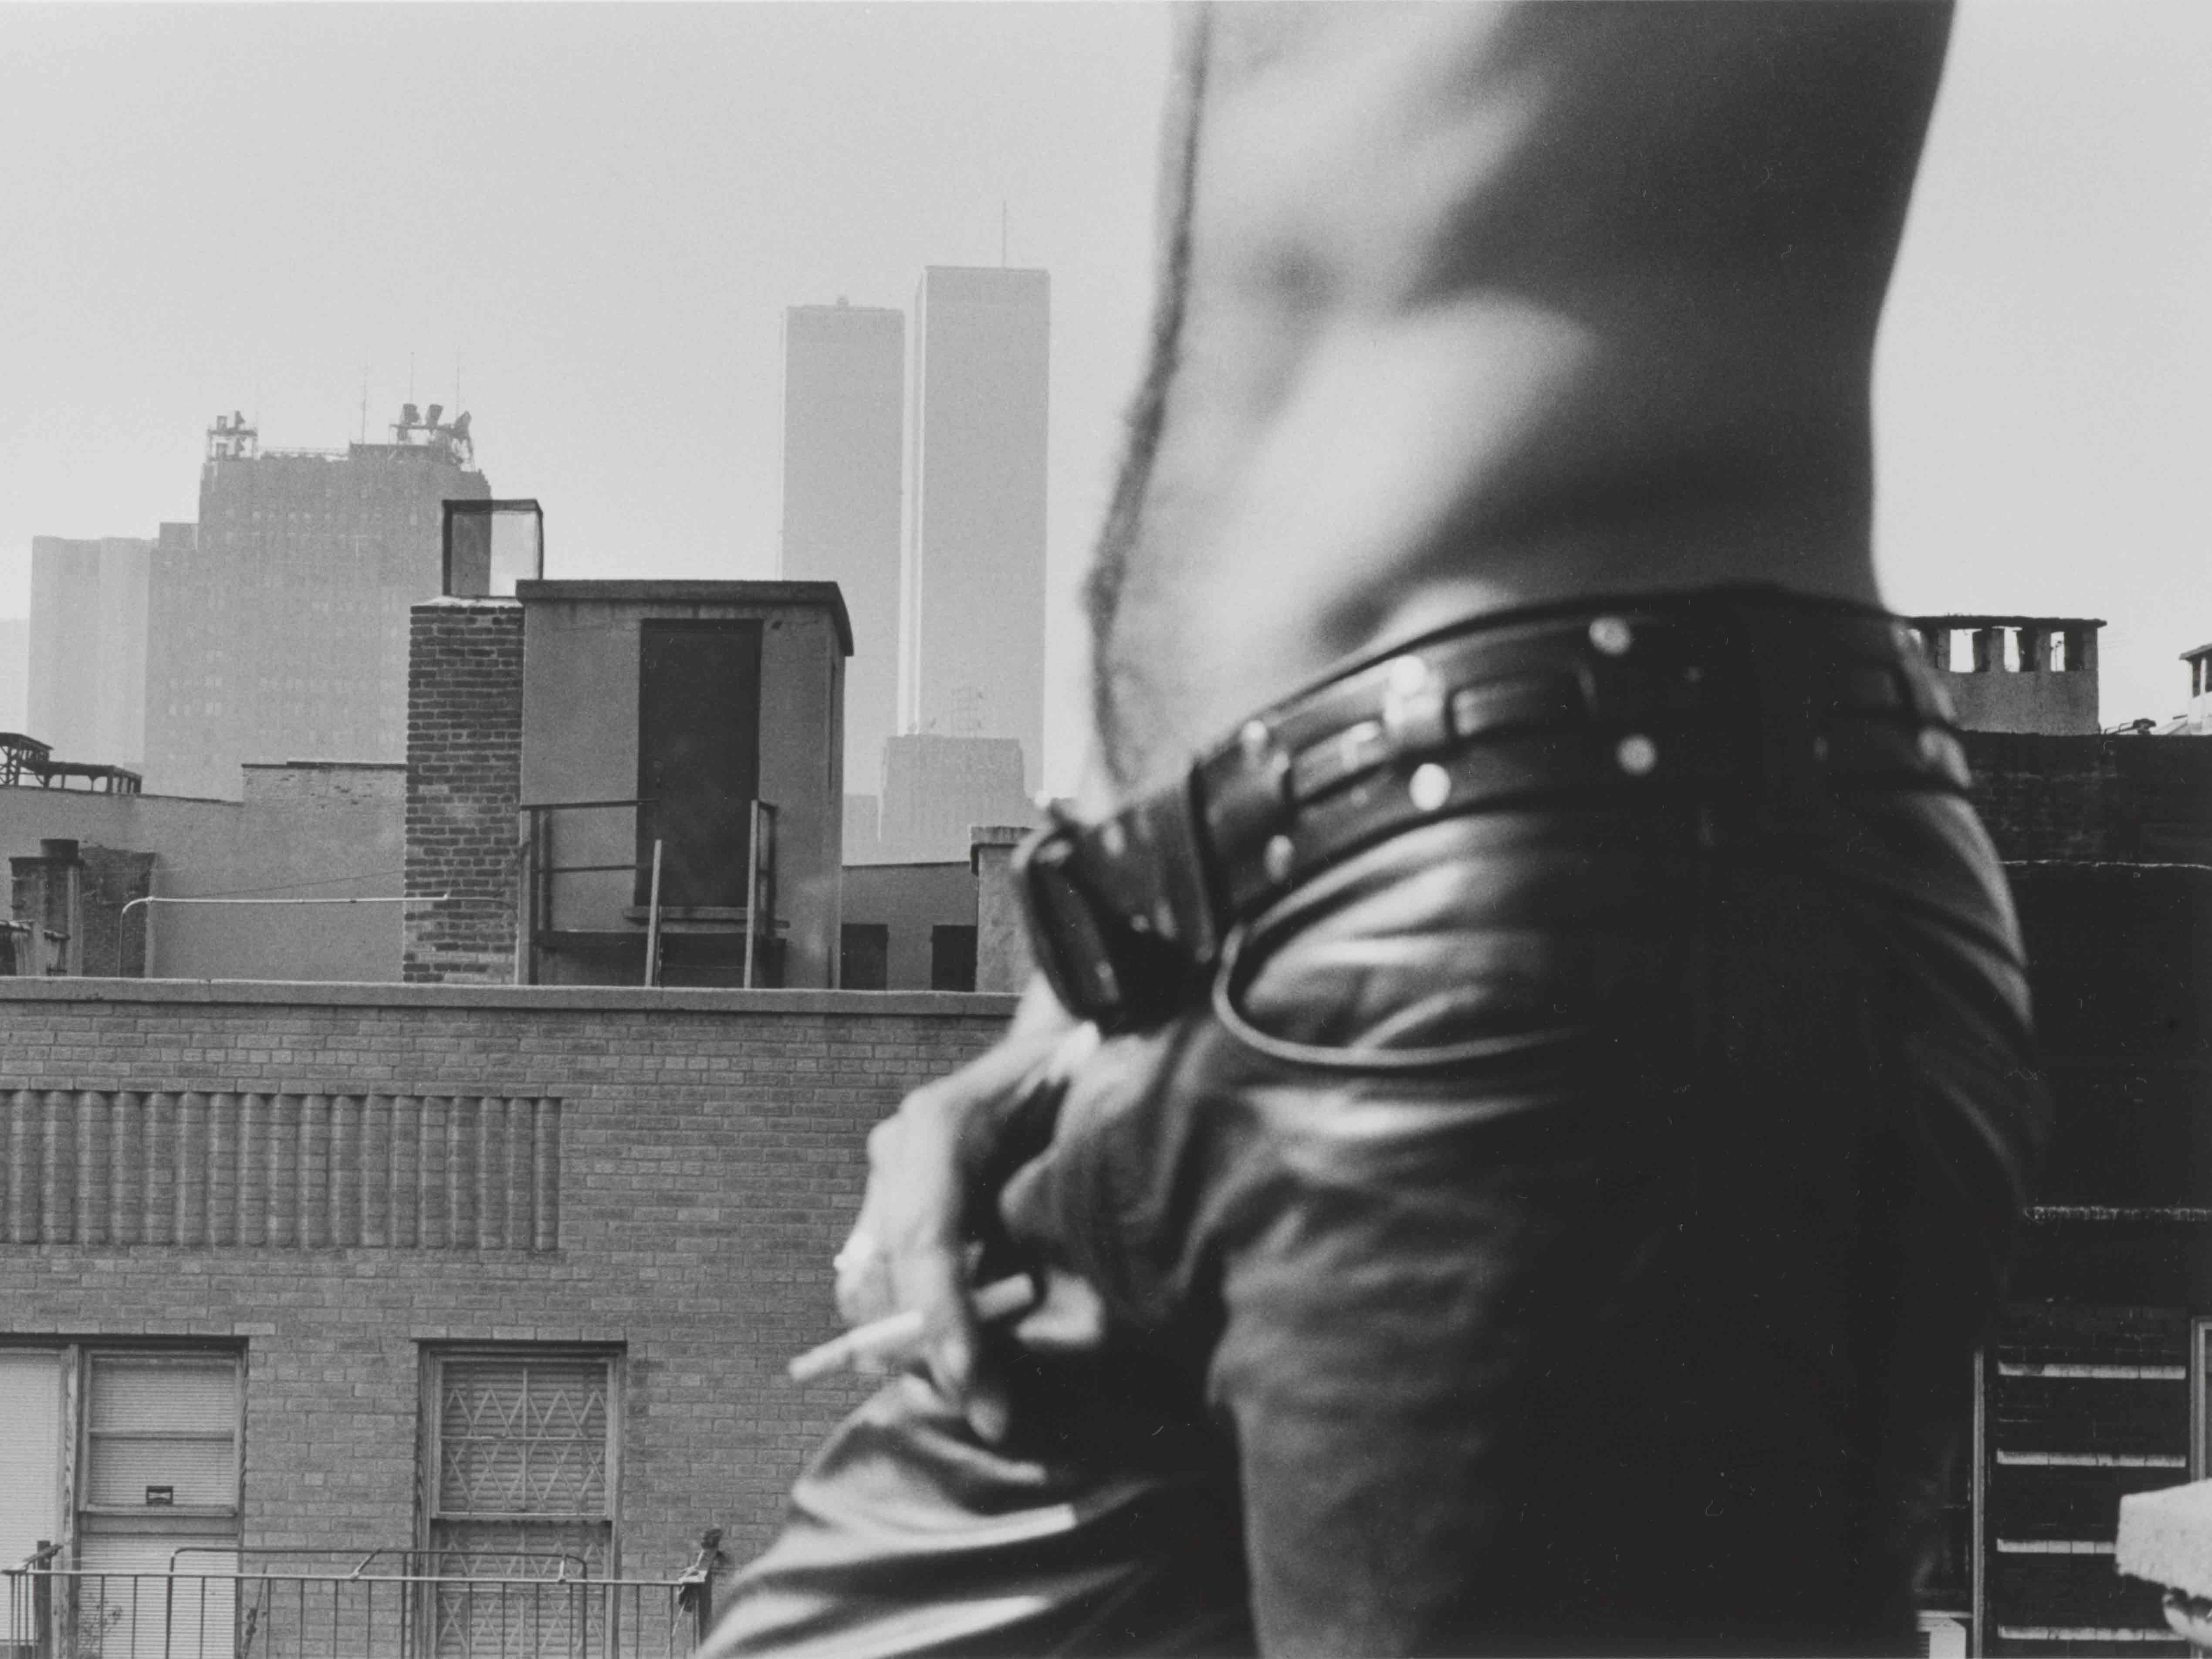 A black and white photograph of a man's torso. He is wearing jeans and smoking, standing on a roof with a city in the background.